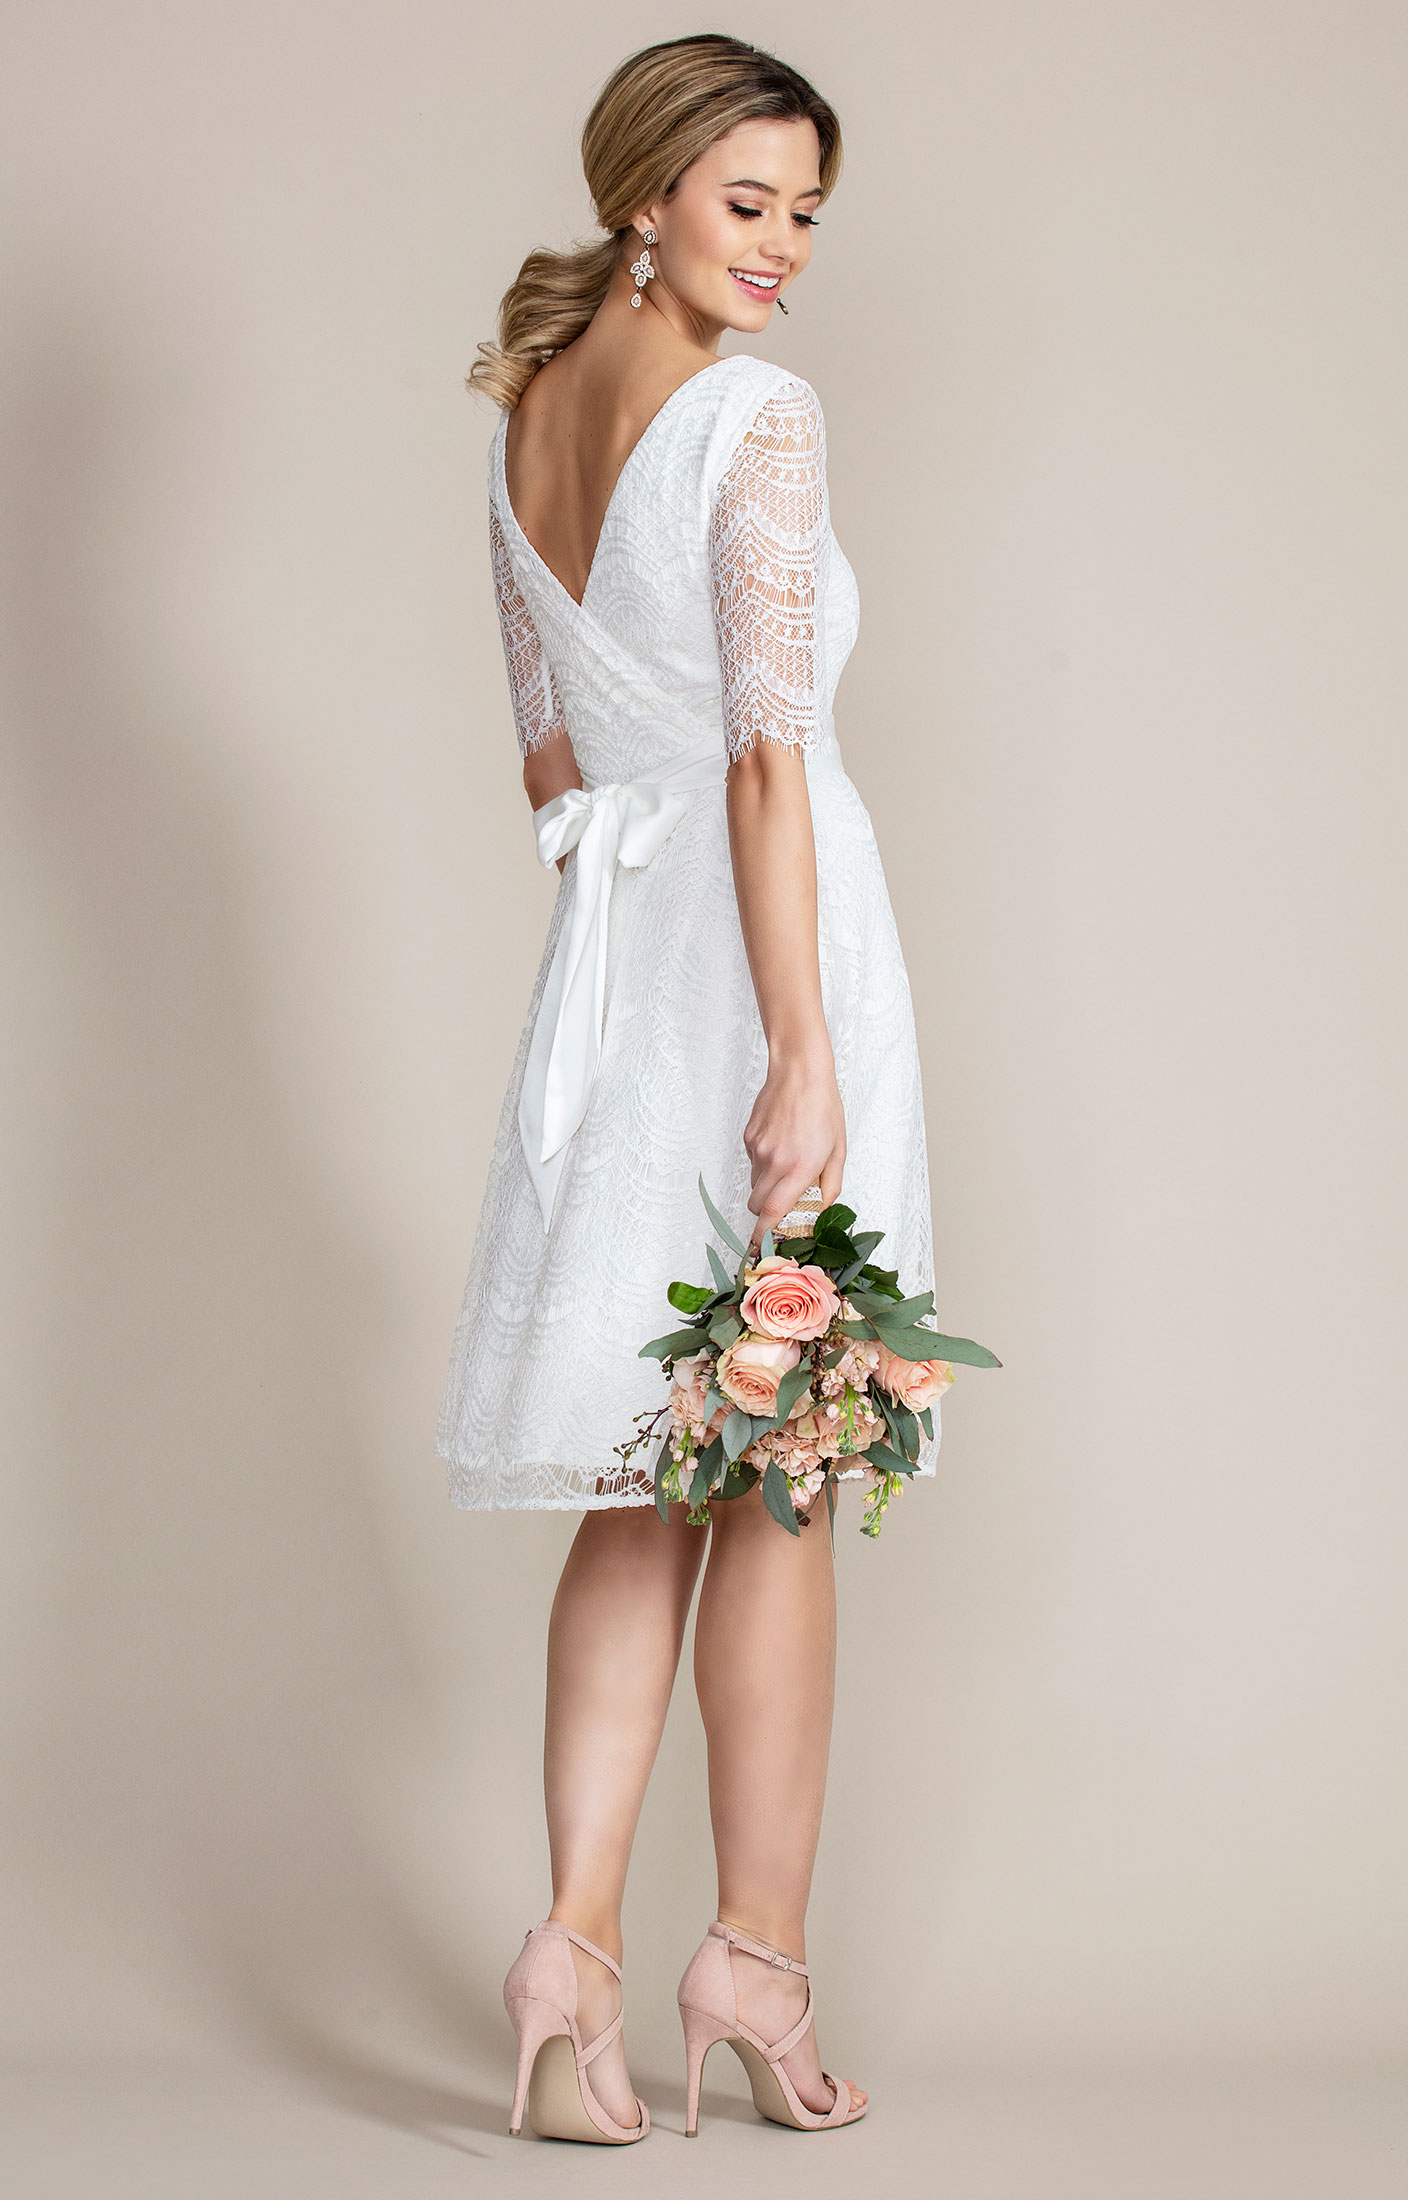 Lace Dress short Ivory - Wedding Dresses, Evening Wear Clothes by Alie Street.